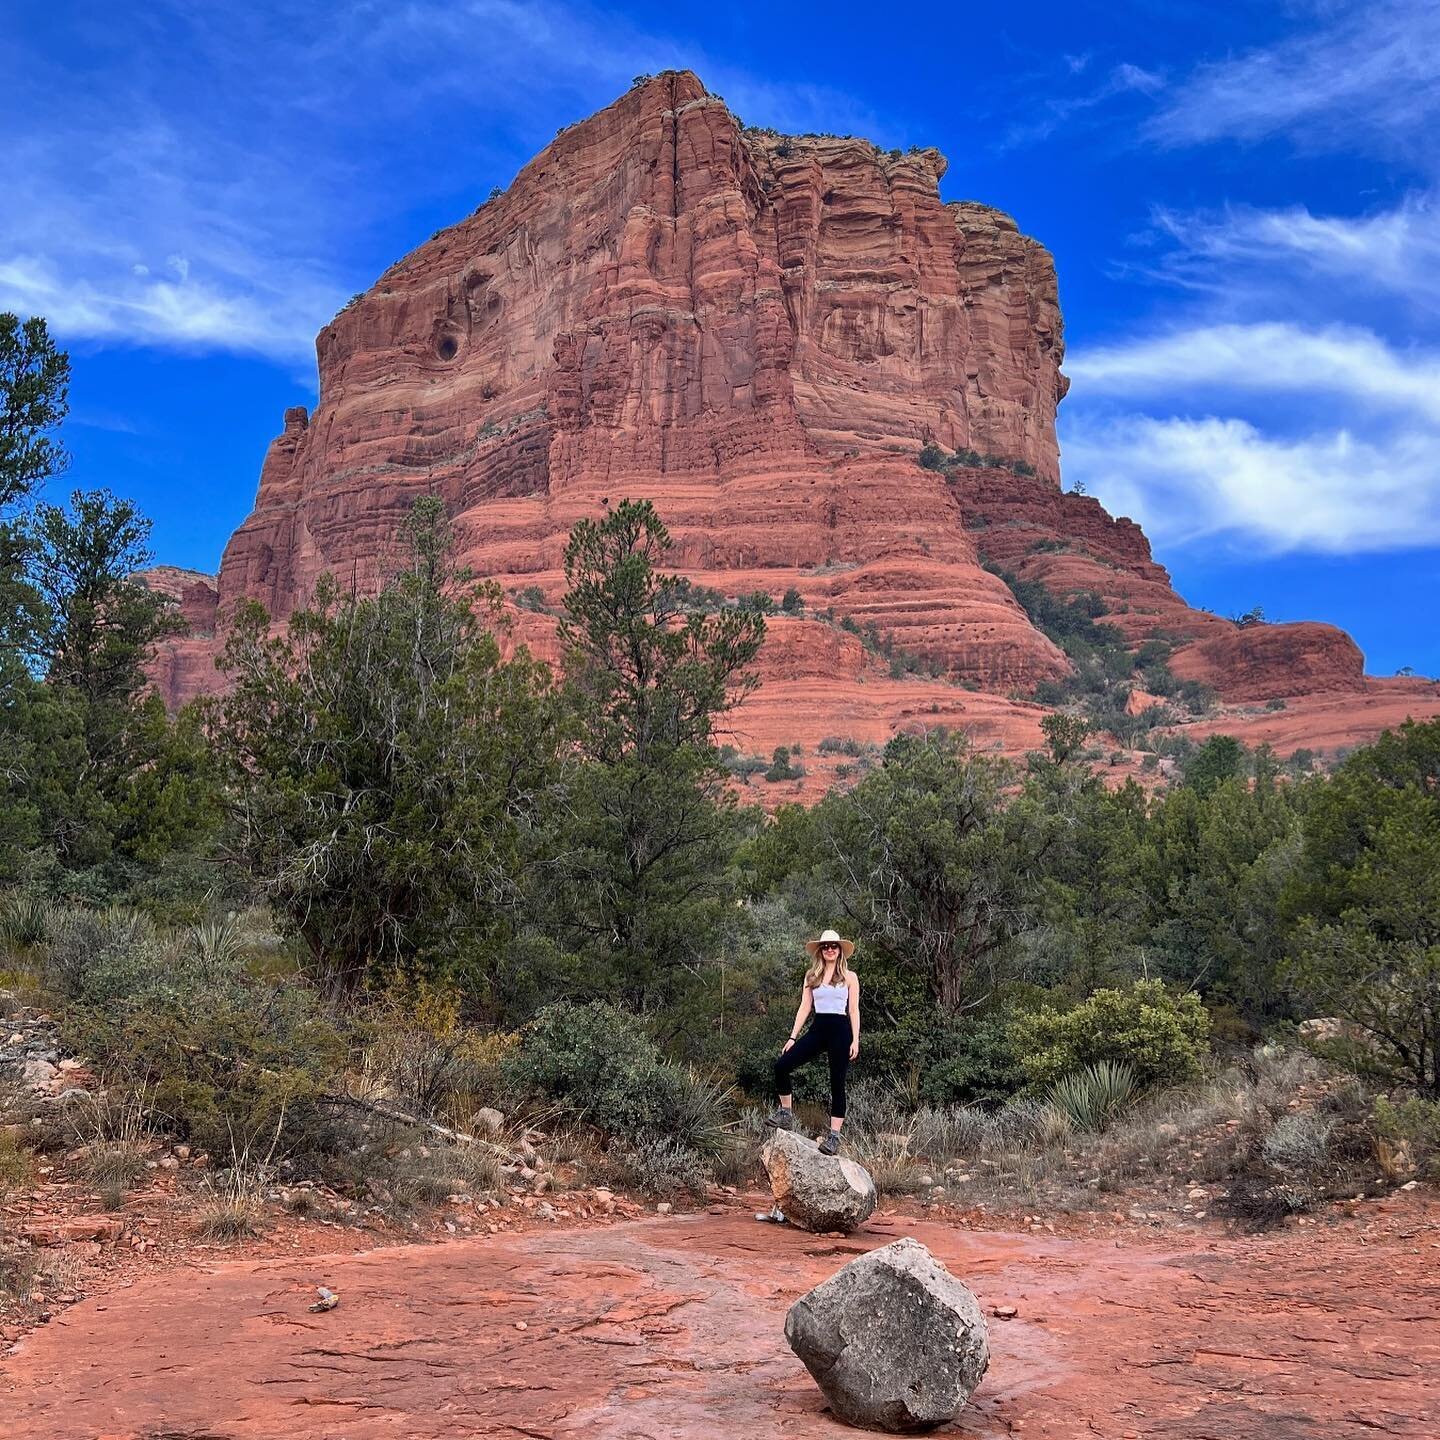 it was the greatest spa cowboy wild west birthday getaway with my bestie @mbasugordon this week. thanks for all the birthday love as i roamed the range.
.
#🤠 #birthday #wildwestbirthday #spacowboy #sedona #hiking #javelina #birthdaytrip #cathedralro